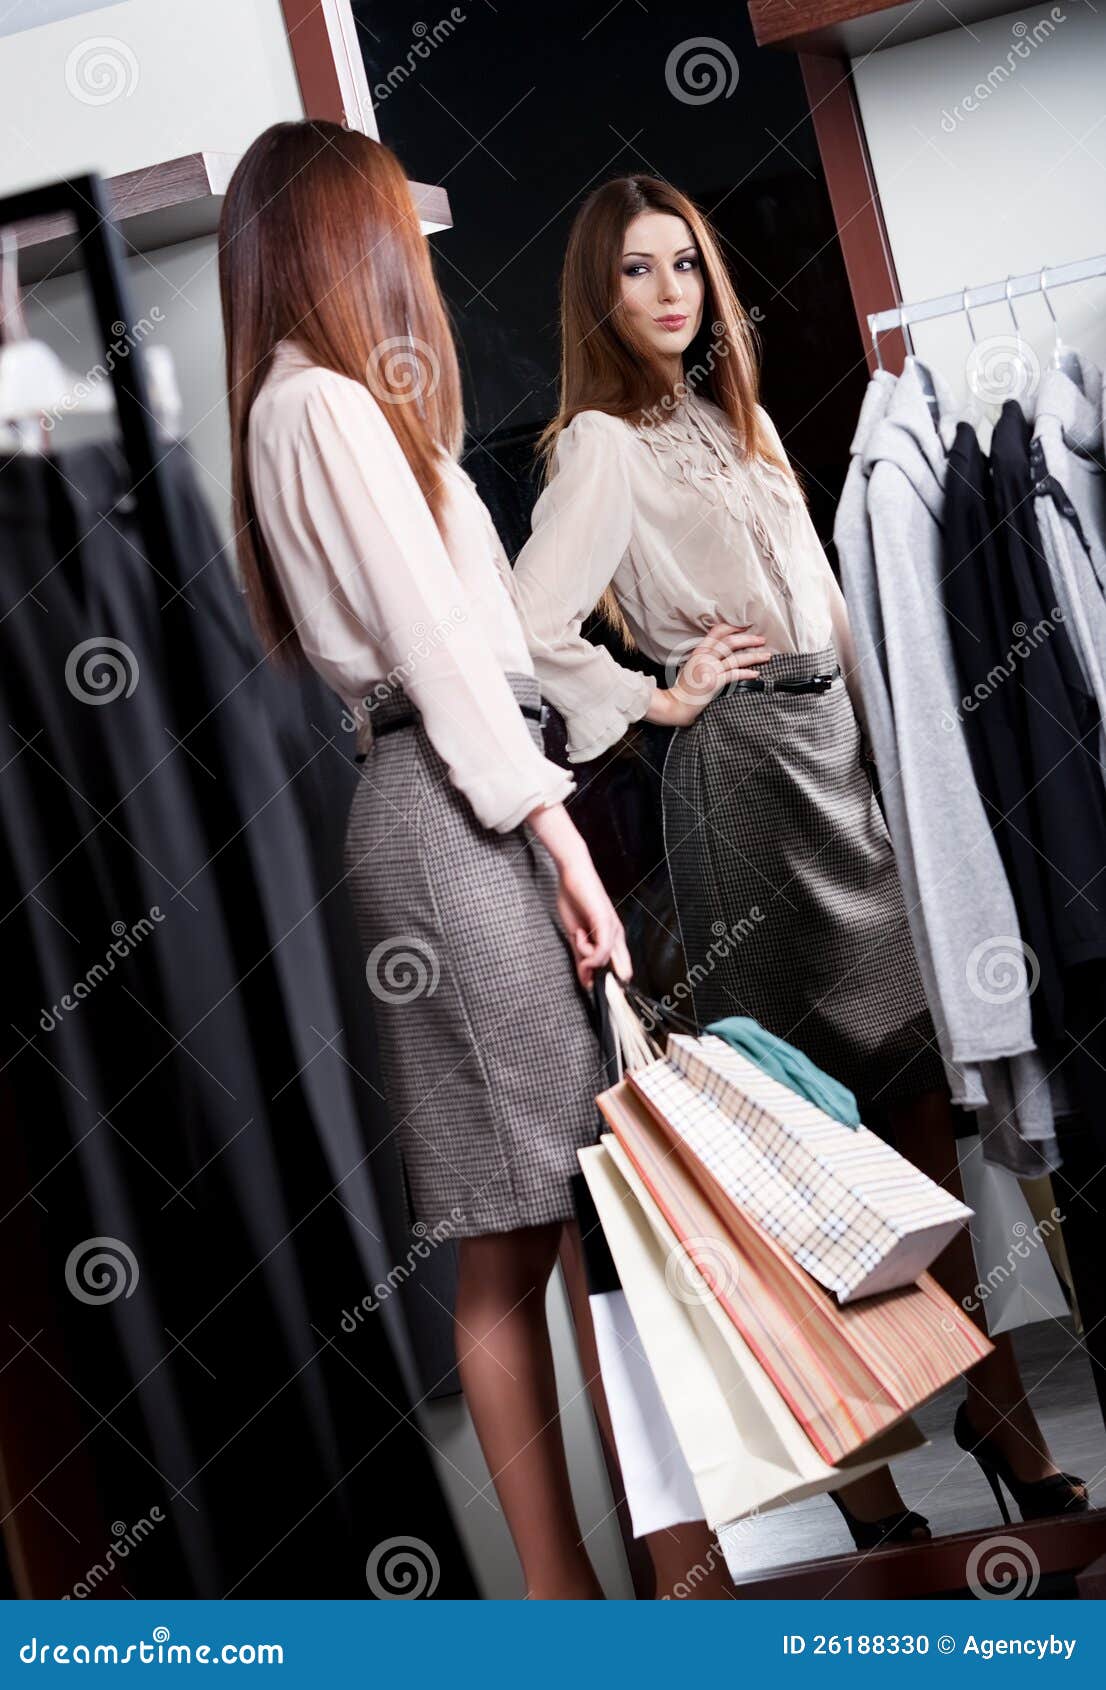 Admiring herself at the mirror. Woman admires herself at the mirror in the store while handing packets with purchases